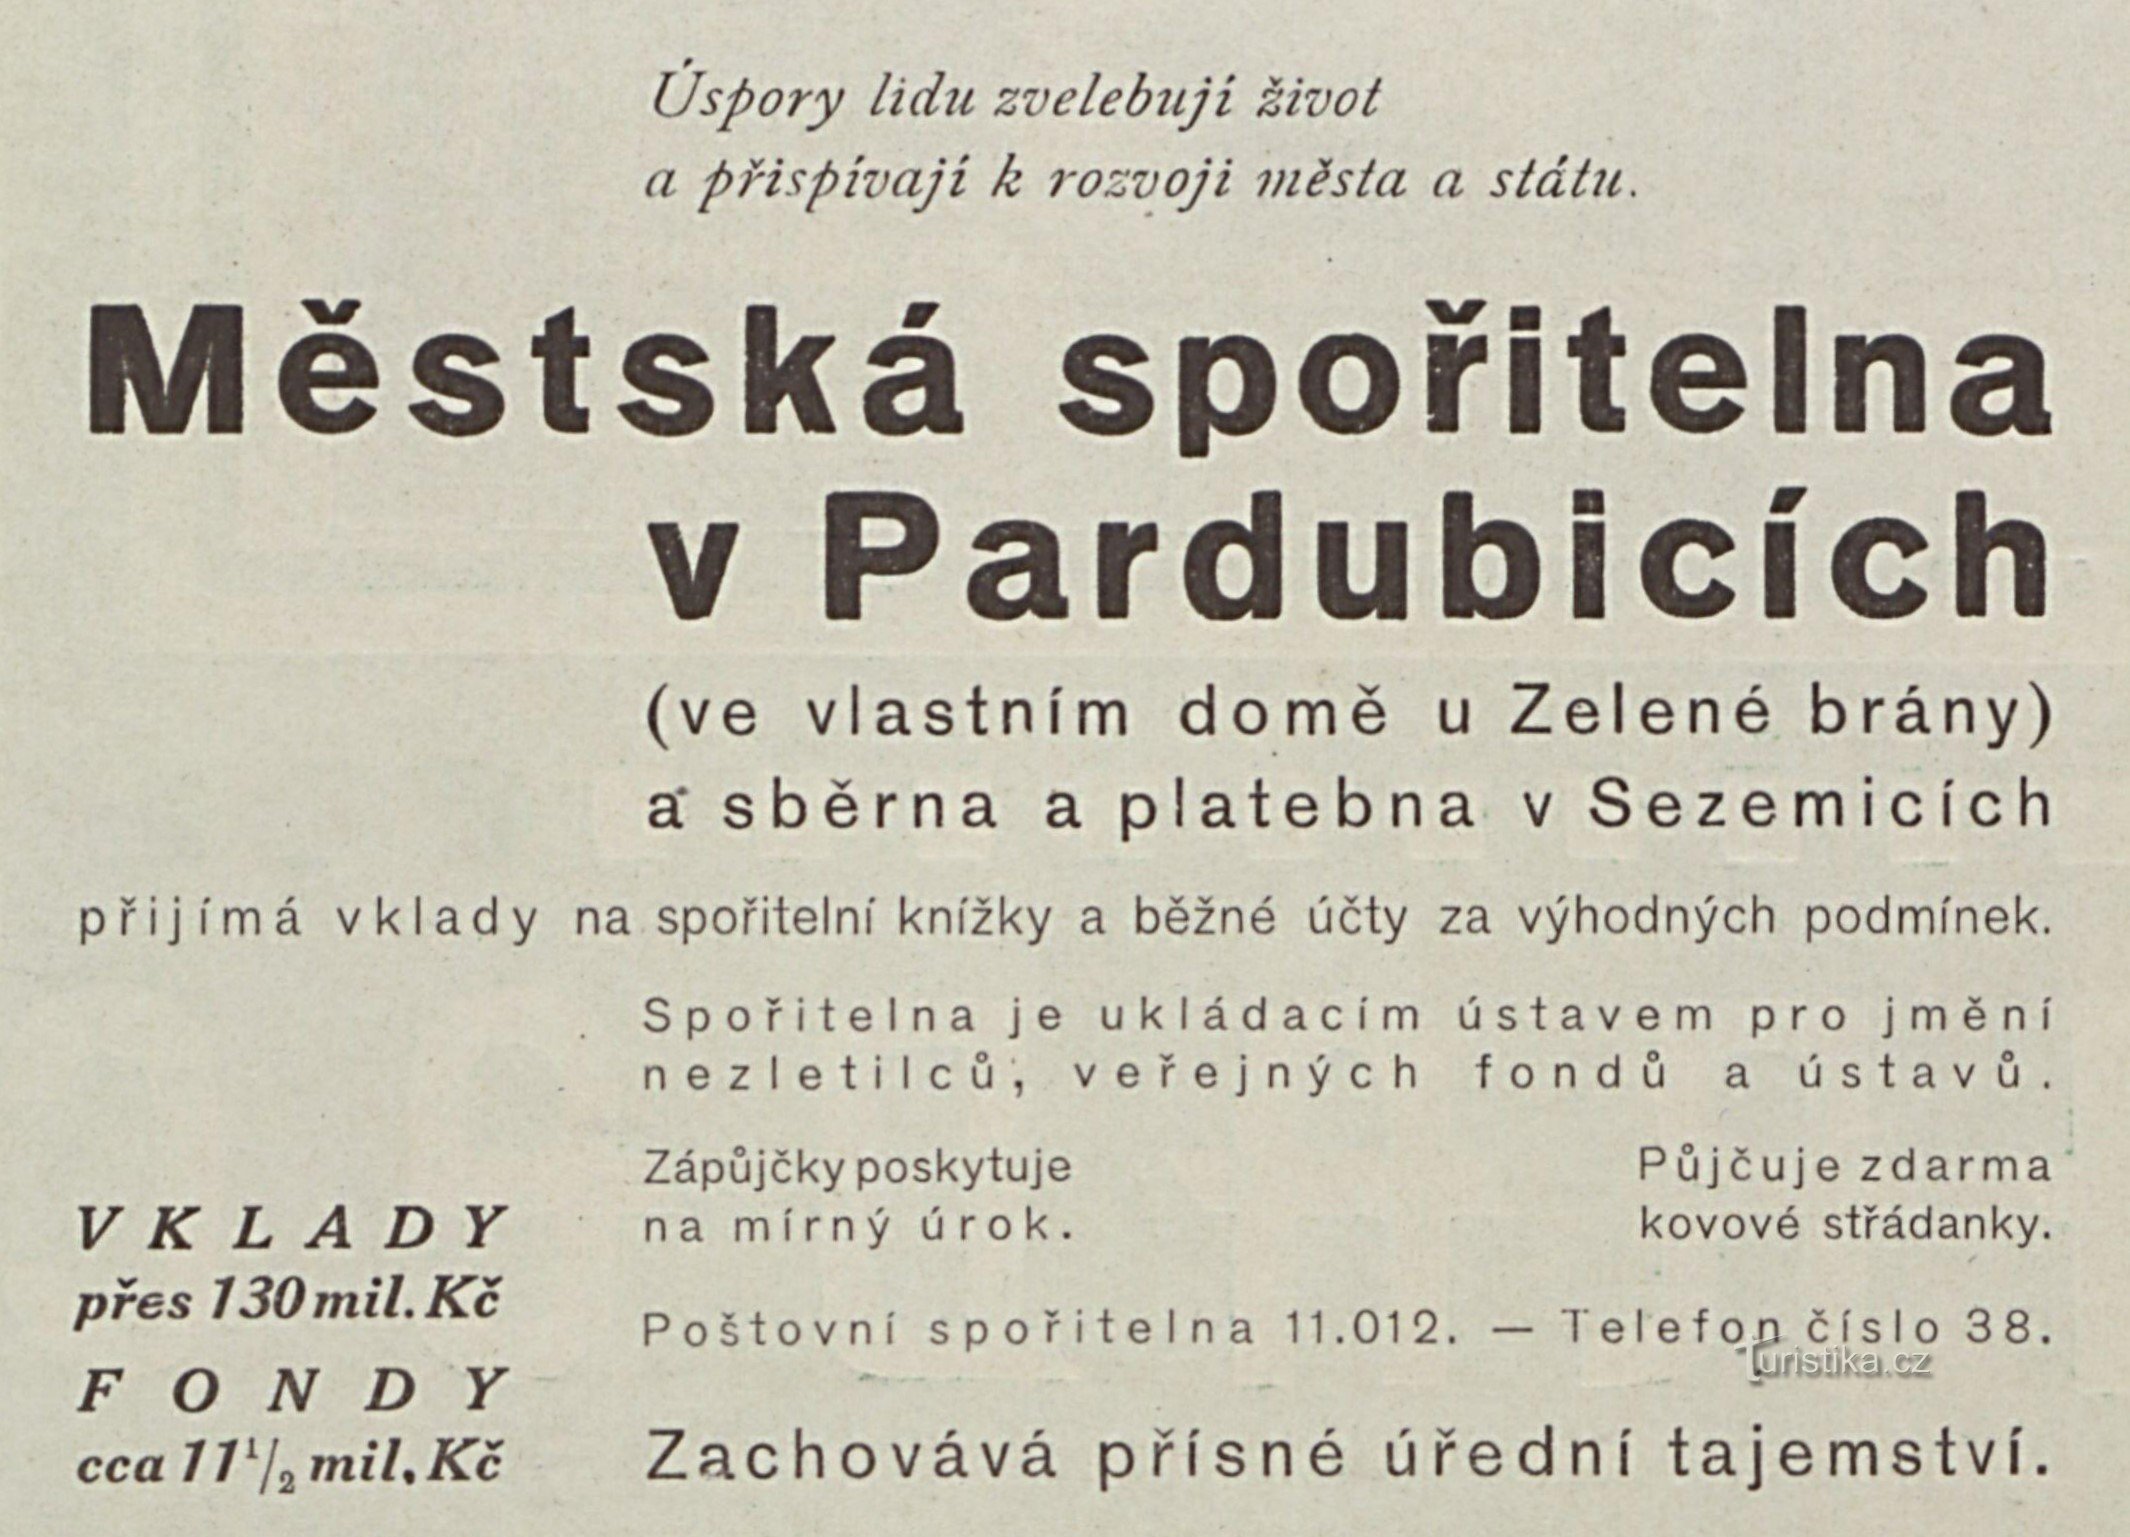 Advertisement of the Municipal Savings Bank in Pardubice from the 20s